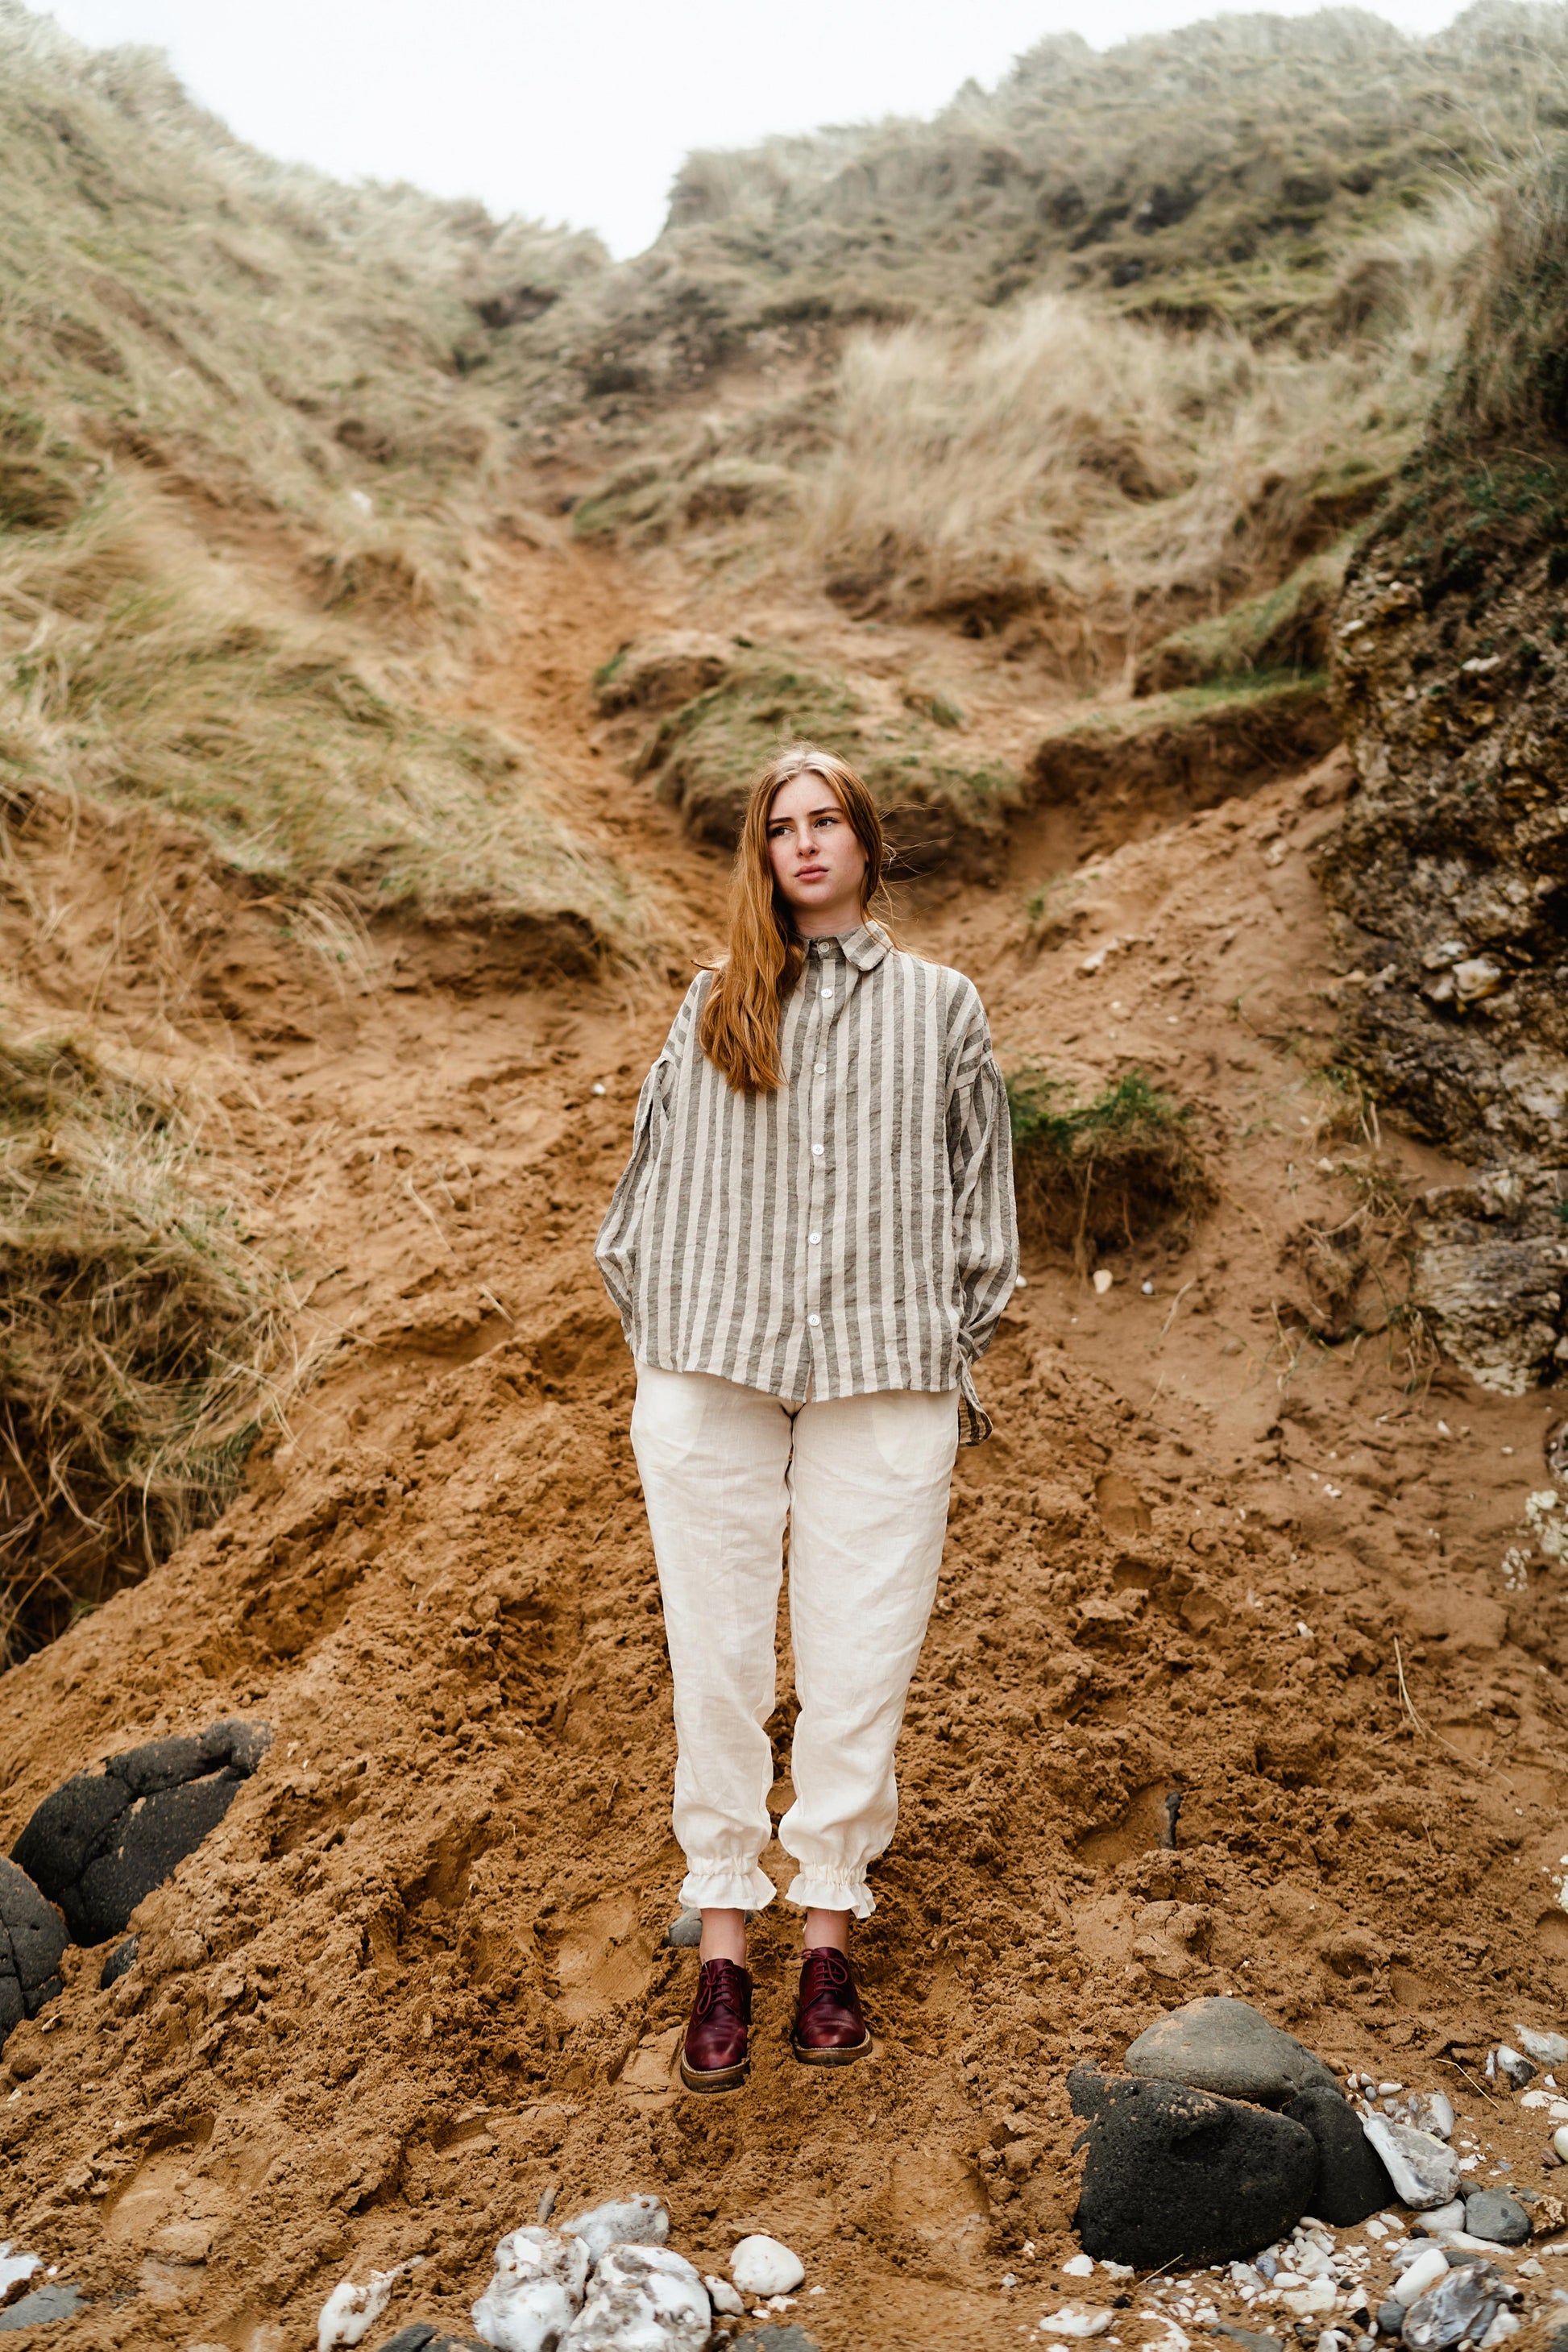 WILLOW BLOUSE | A truly special piece inspired by Irish tradition and craftsmanship The blouse features an asymetric collar detail at the back which can be made to order with or without the addition of irish crochet. The sleeves and back of the shirt have